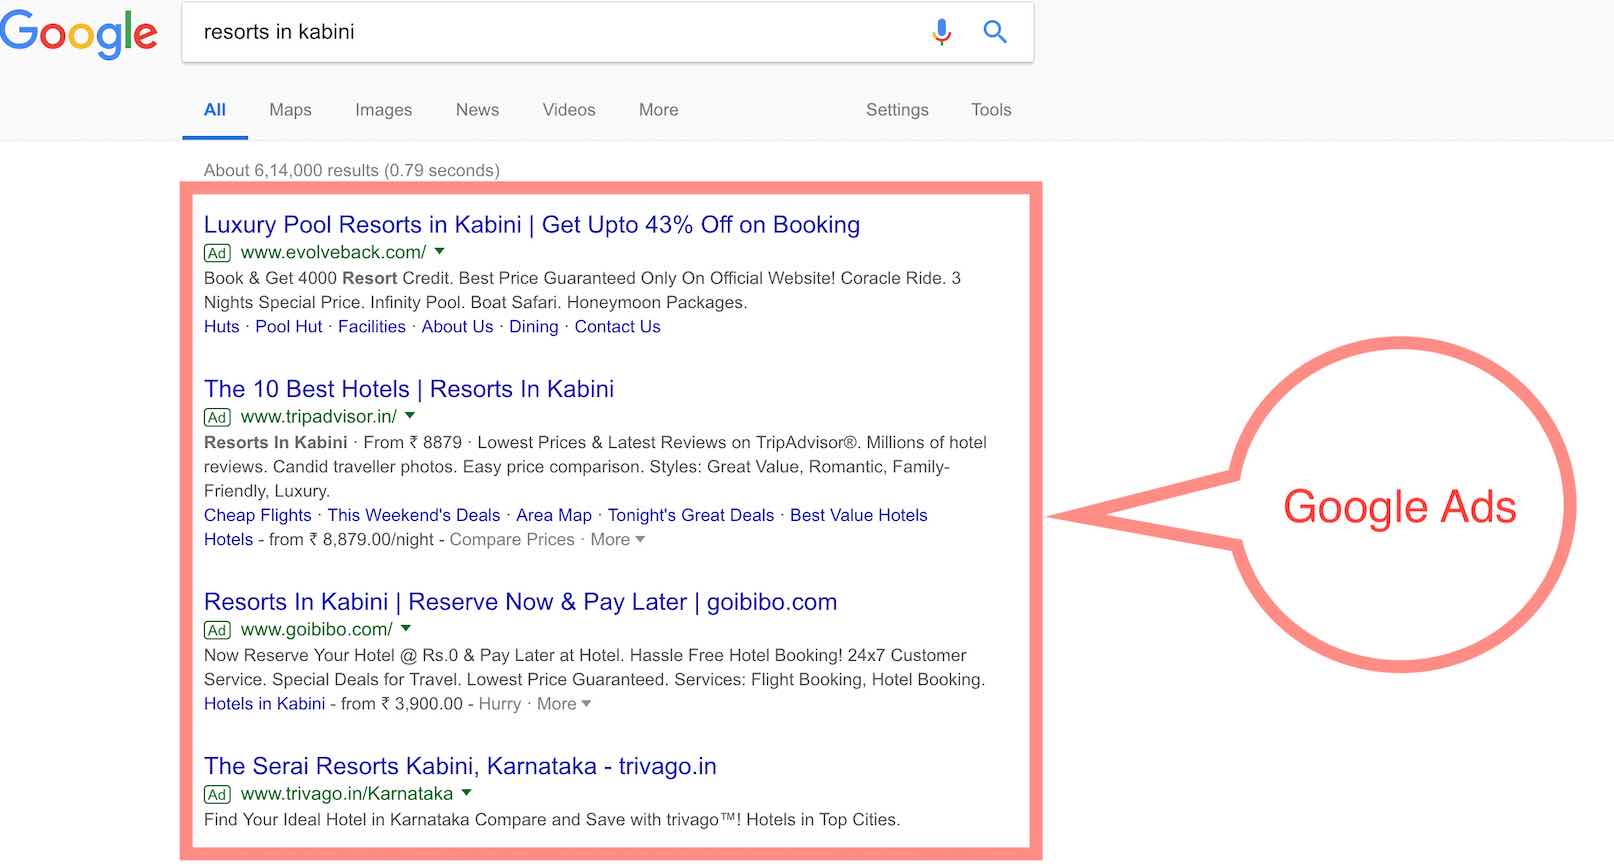 Google Ads Top 4 Search Results